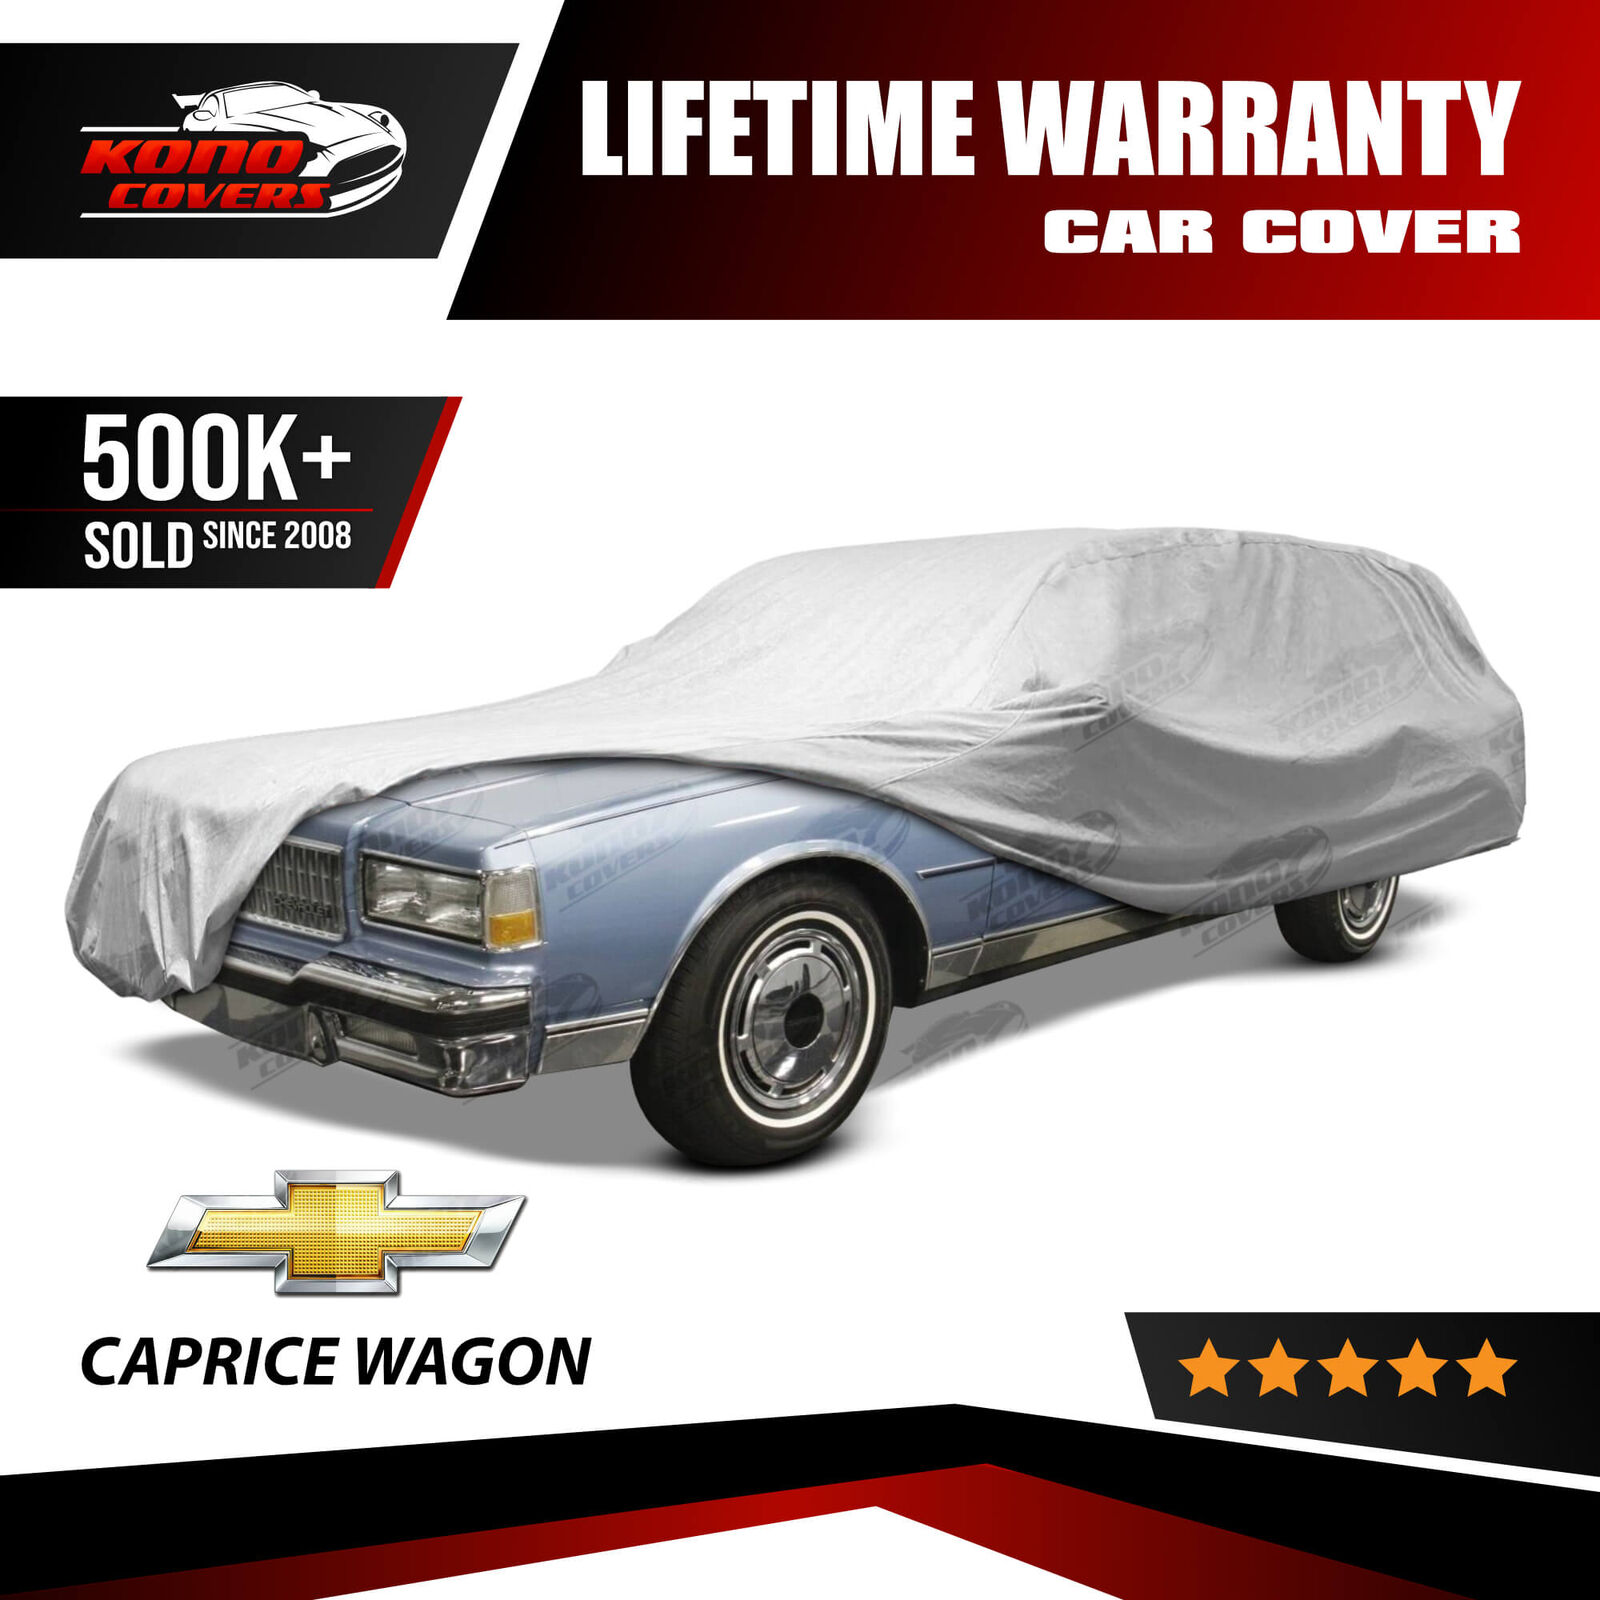 Chevrolet Caprice Wagon 5 Layer Car Cover 1982 1983 1984 1985 1986 1987 1988